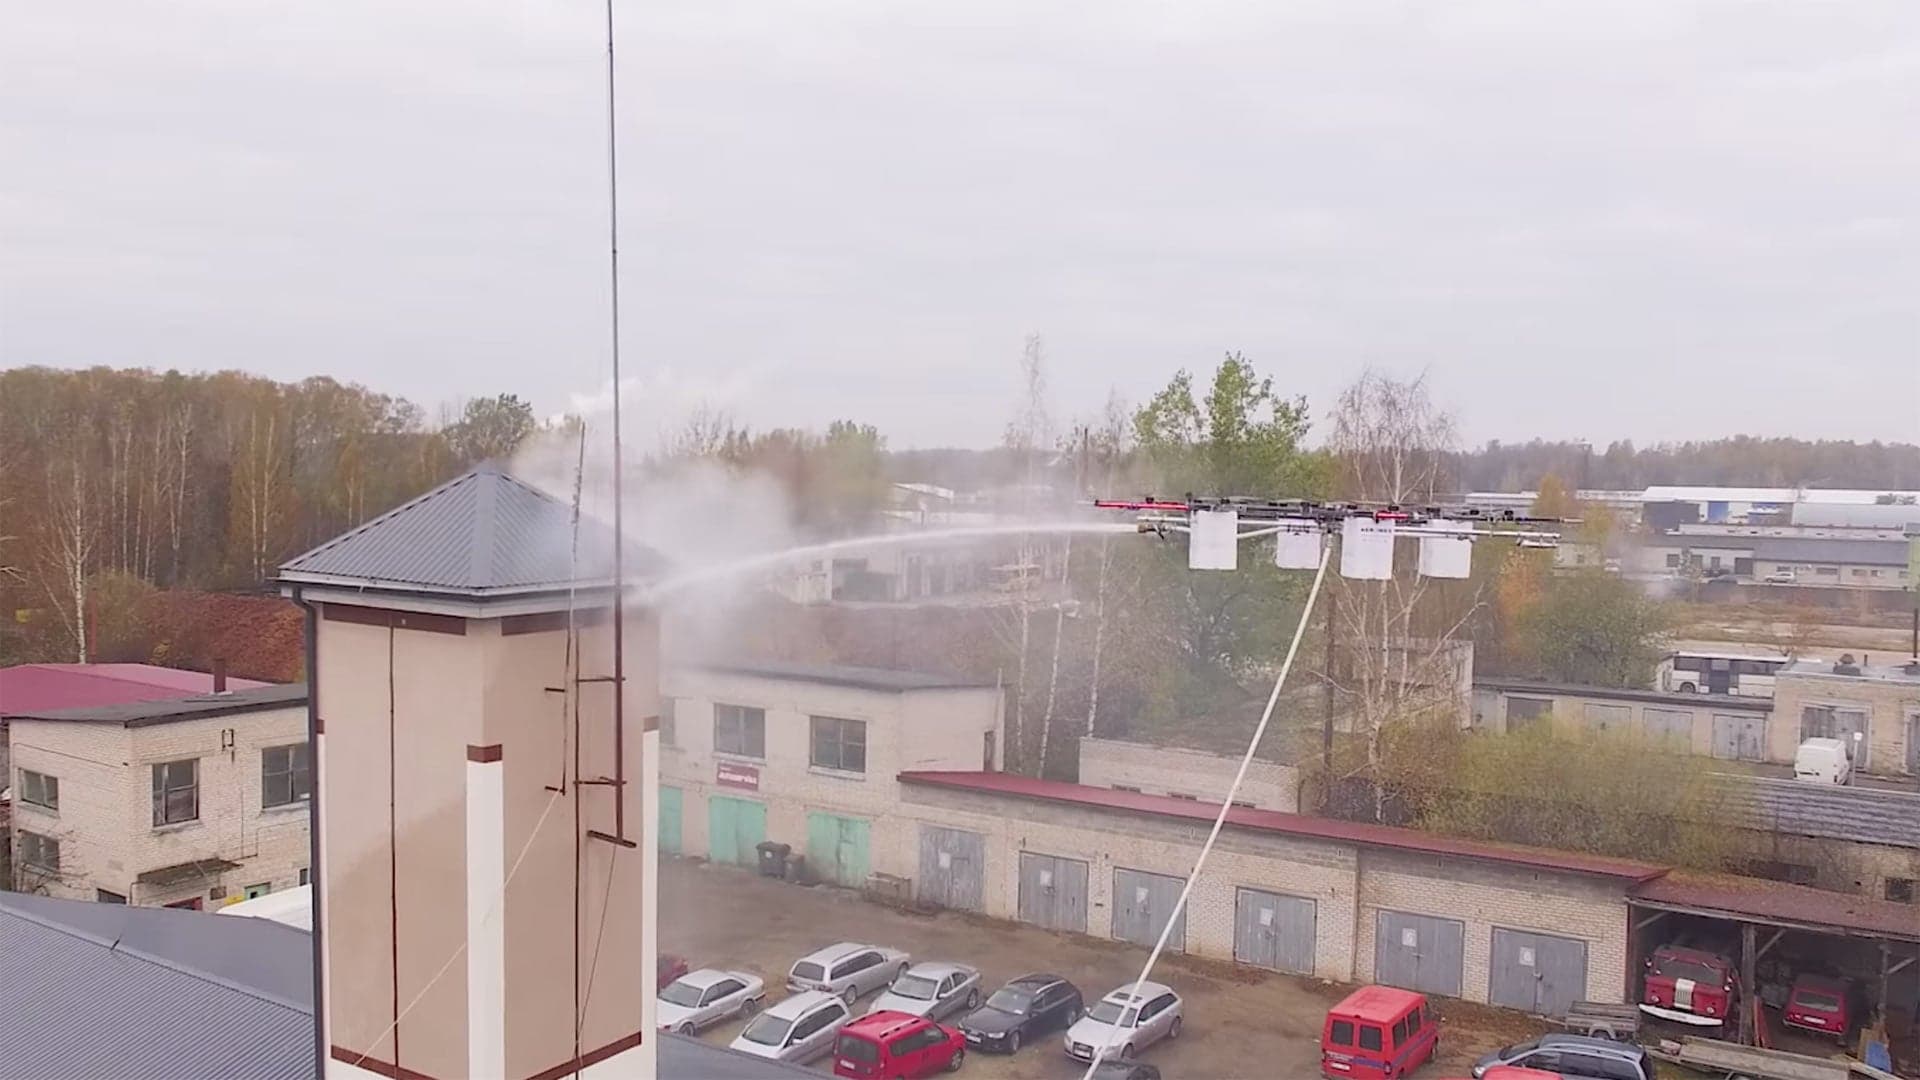 Could This Firefighting Drone Be the Wave of the Future?